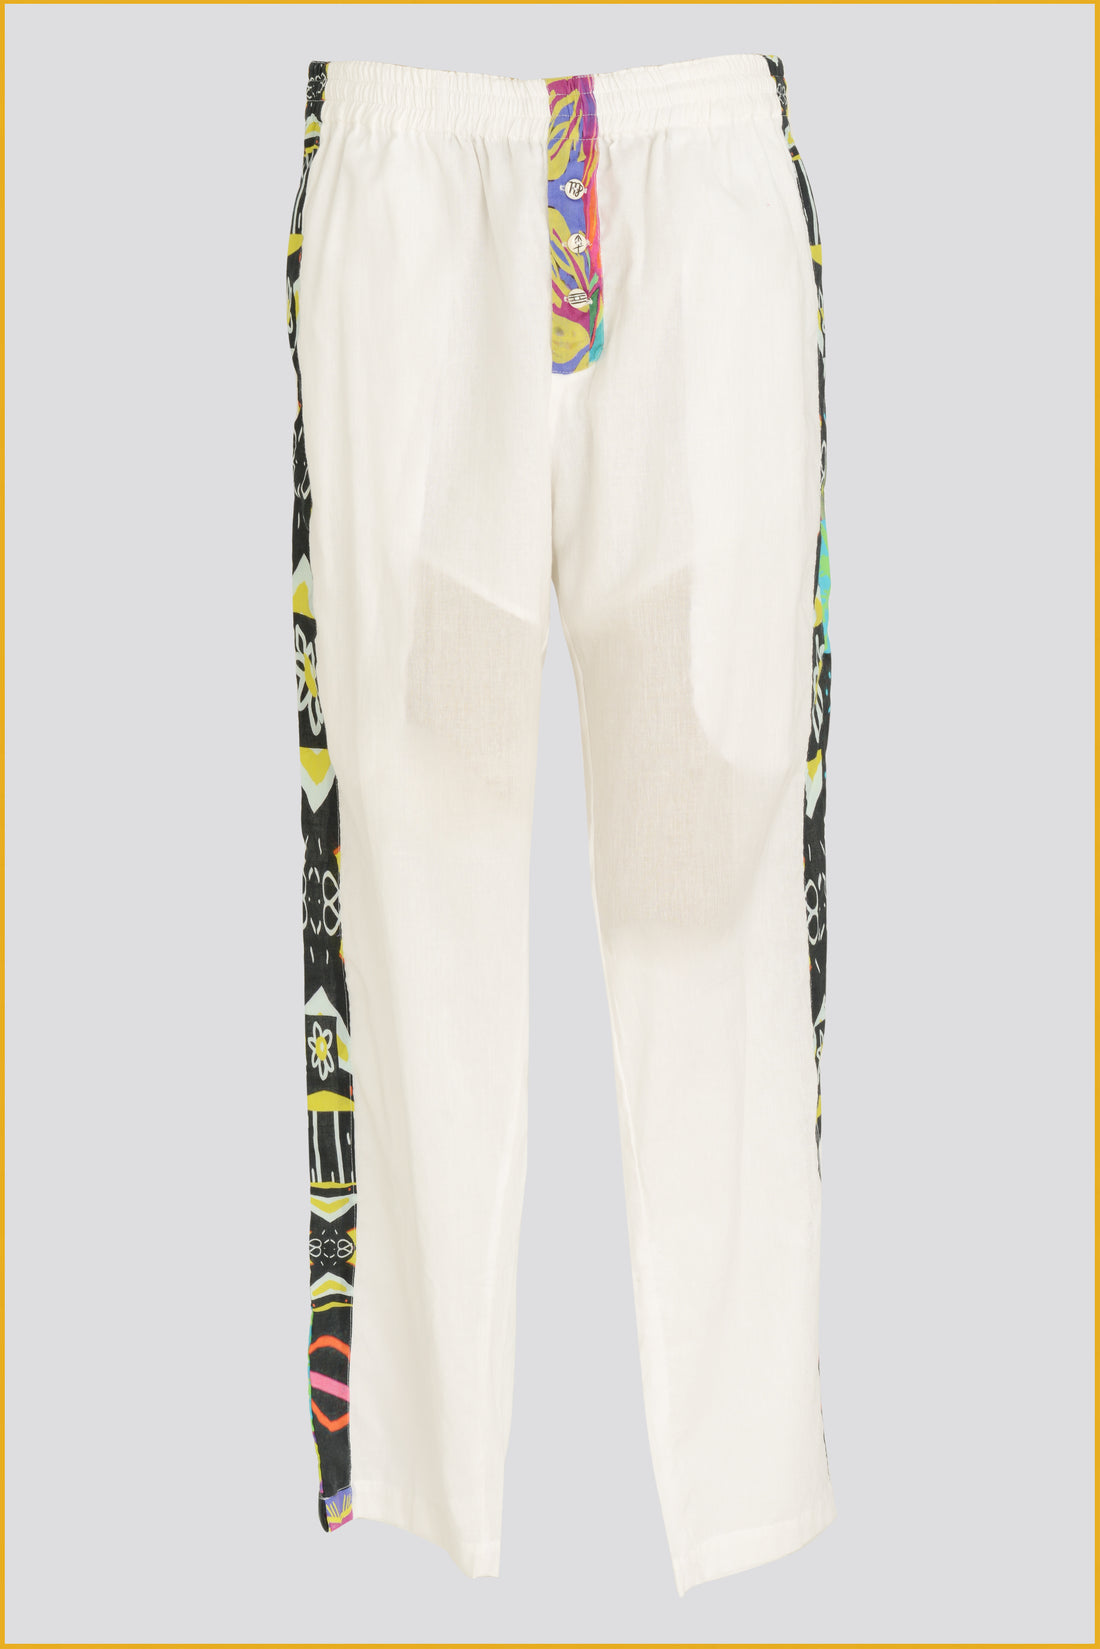 Cairo - Cotton Voile Digital Print Long Pants With Hand Carved Bone Buttons (7390322065604)